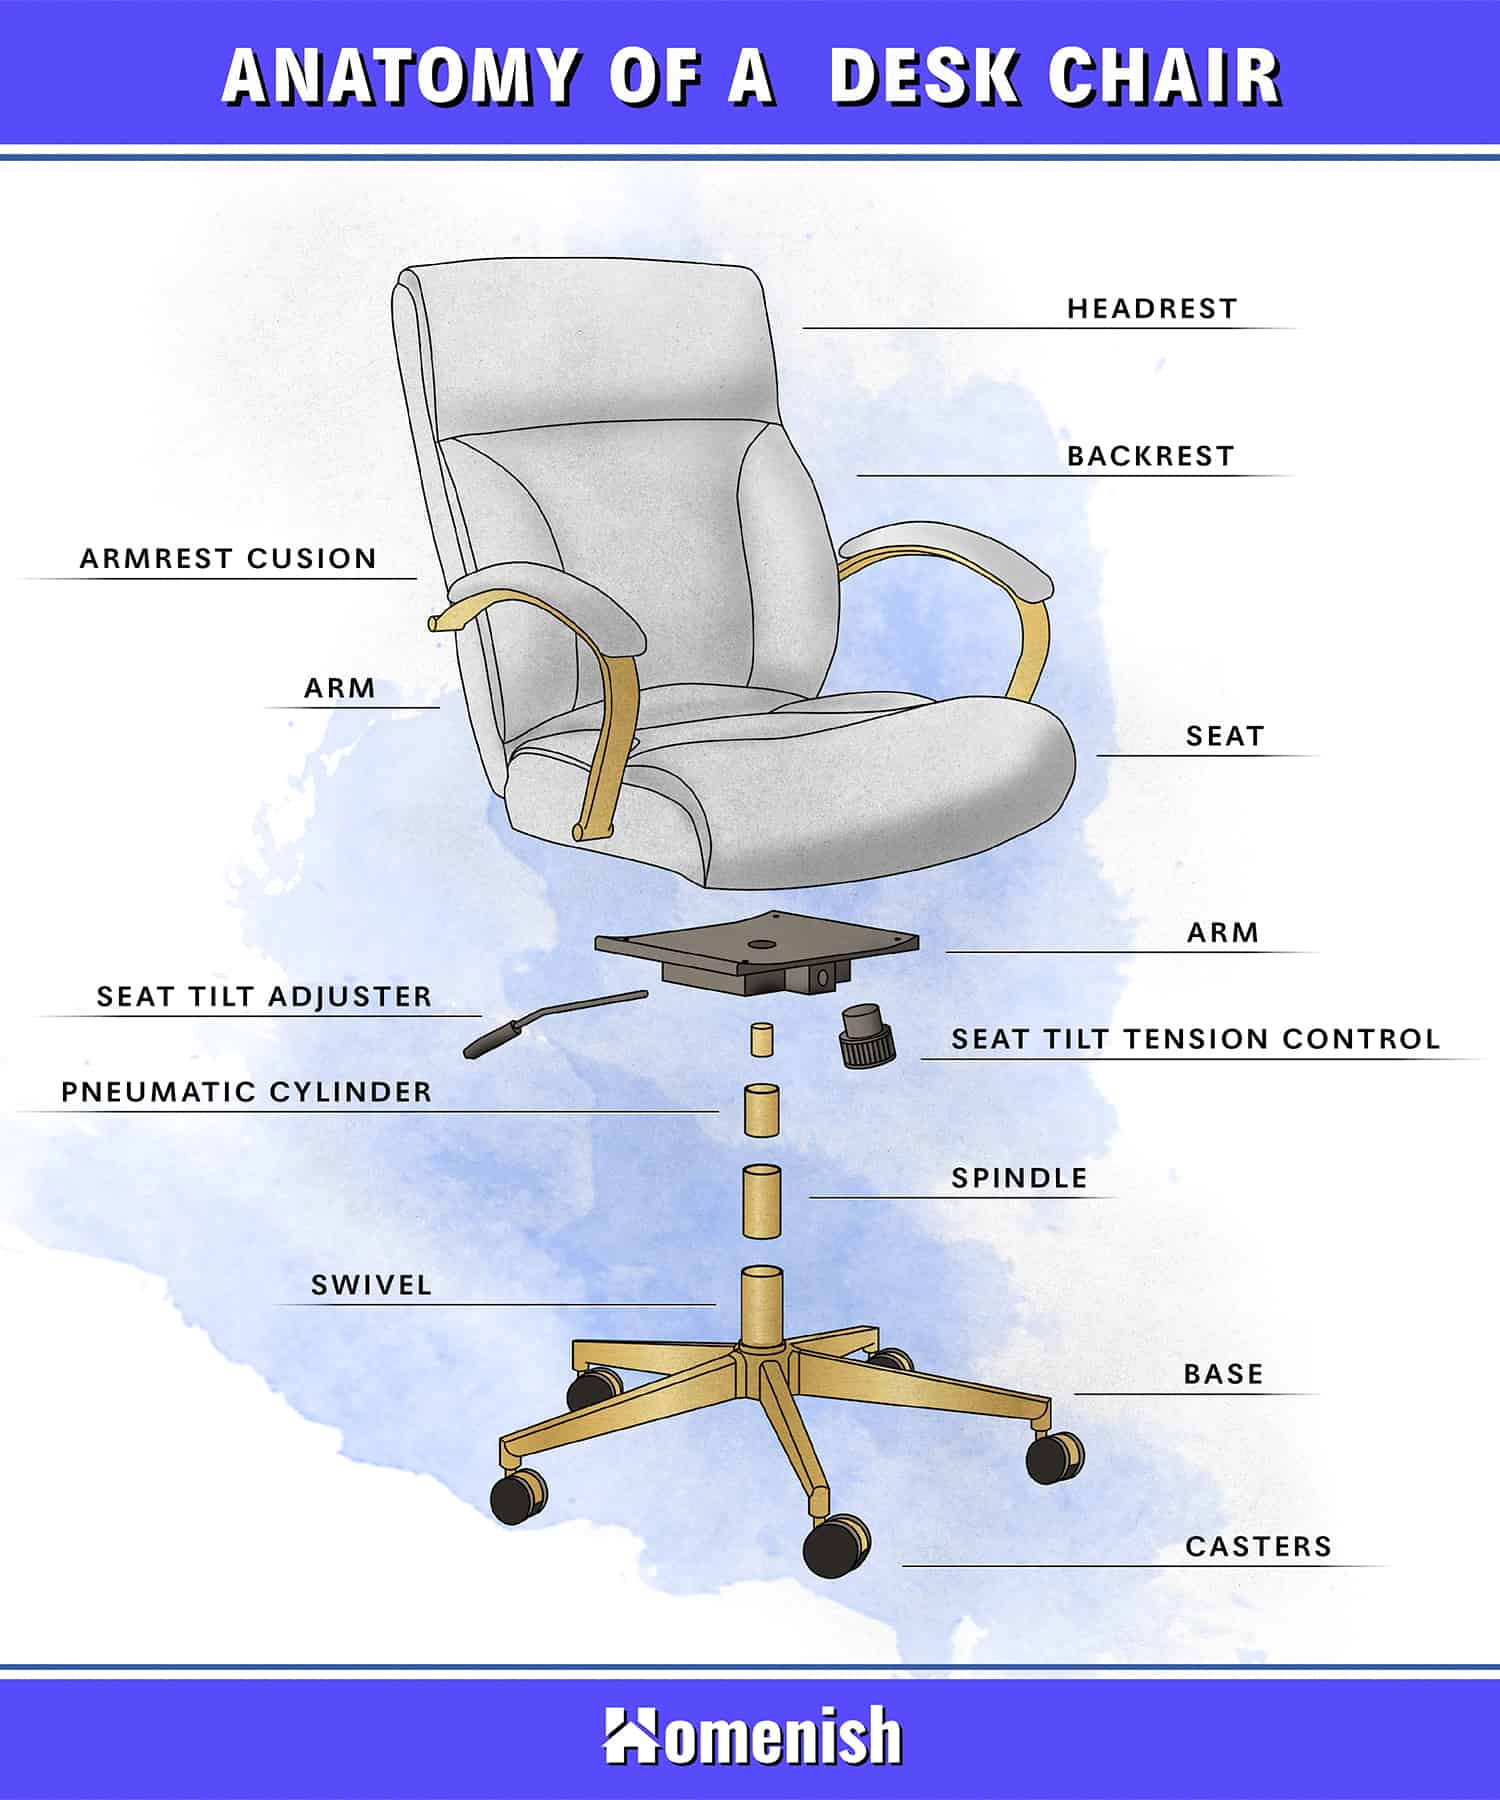 Parts Of A Chair Explained 4 Diagrams, What Is An Armchair Without Arms Called